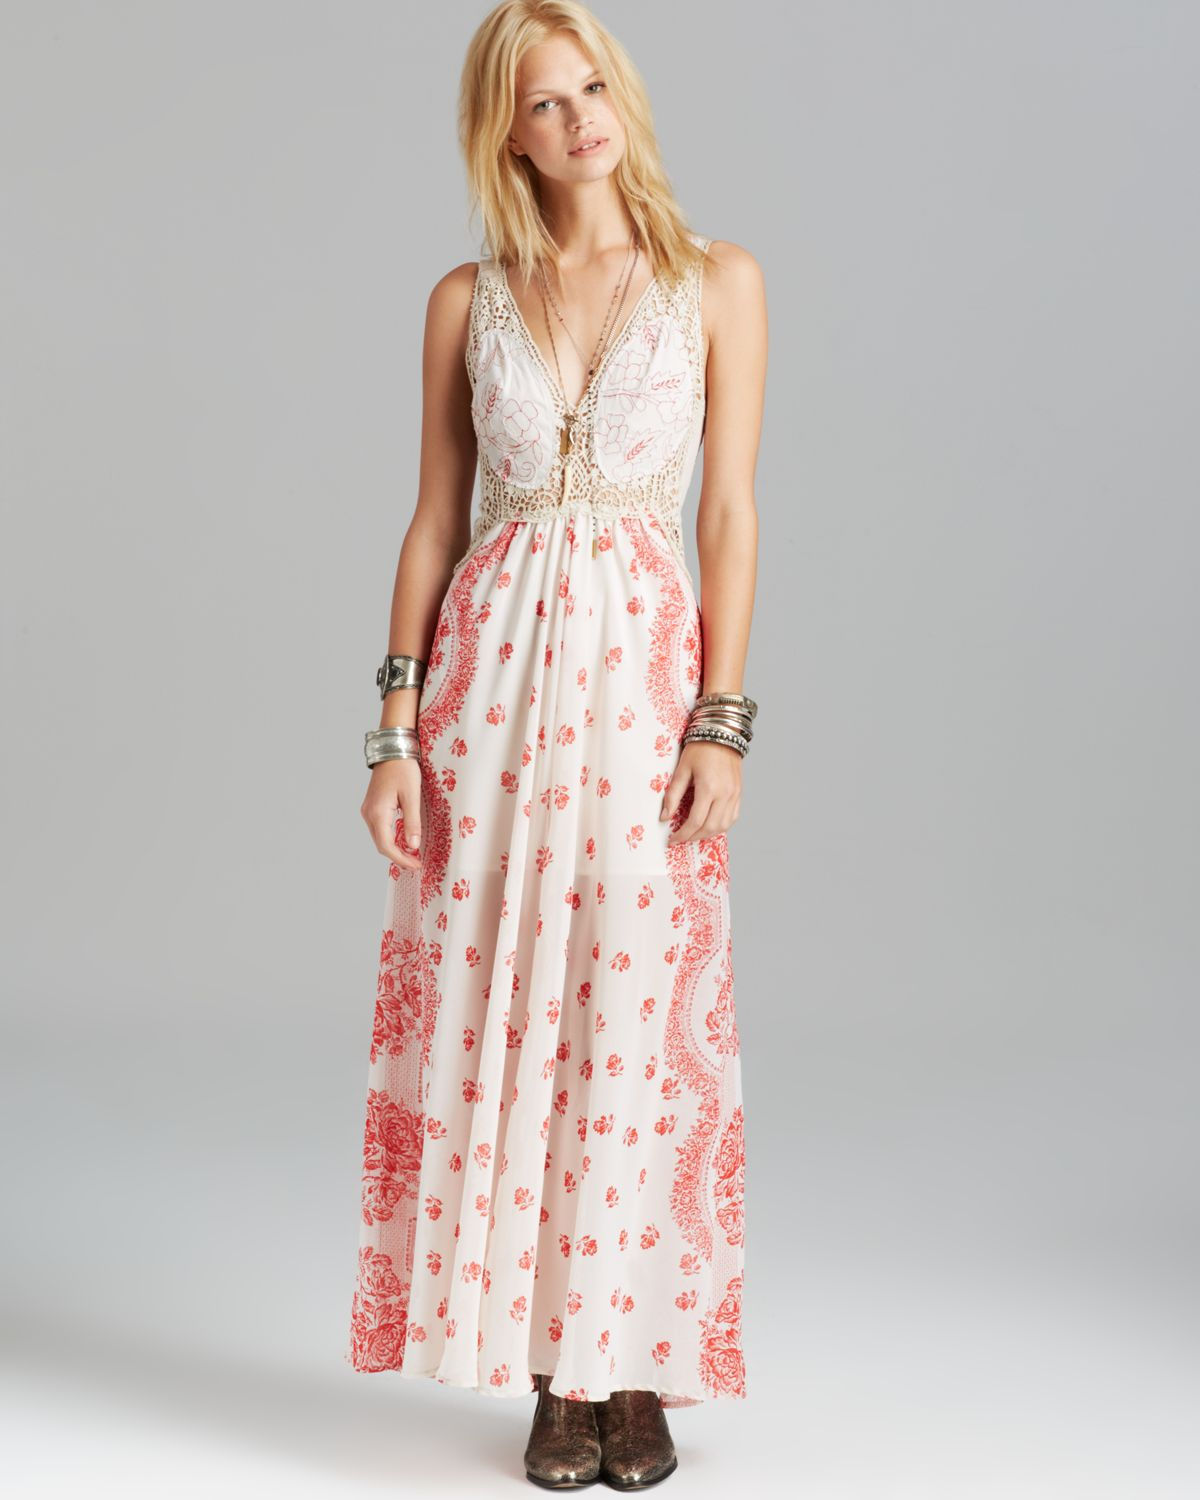 Lyst - Free people Maxi Dress Victorian Love in Natural